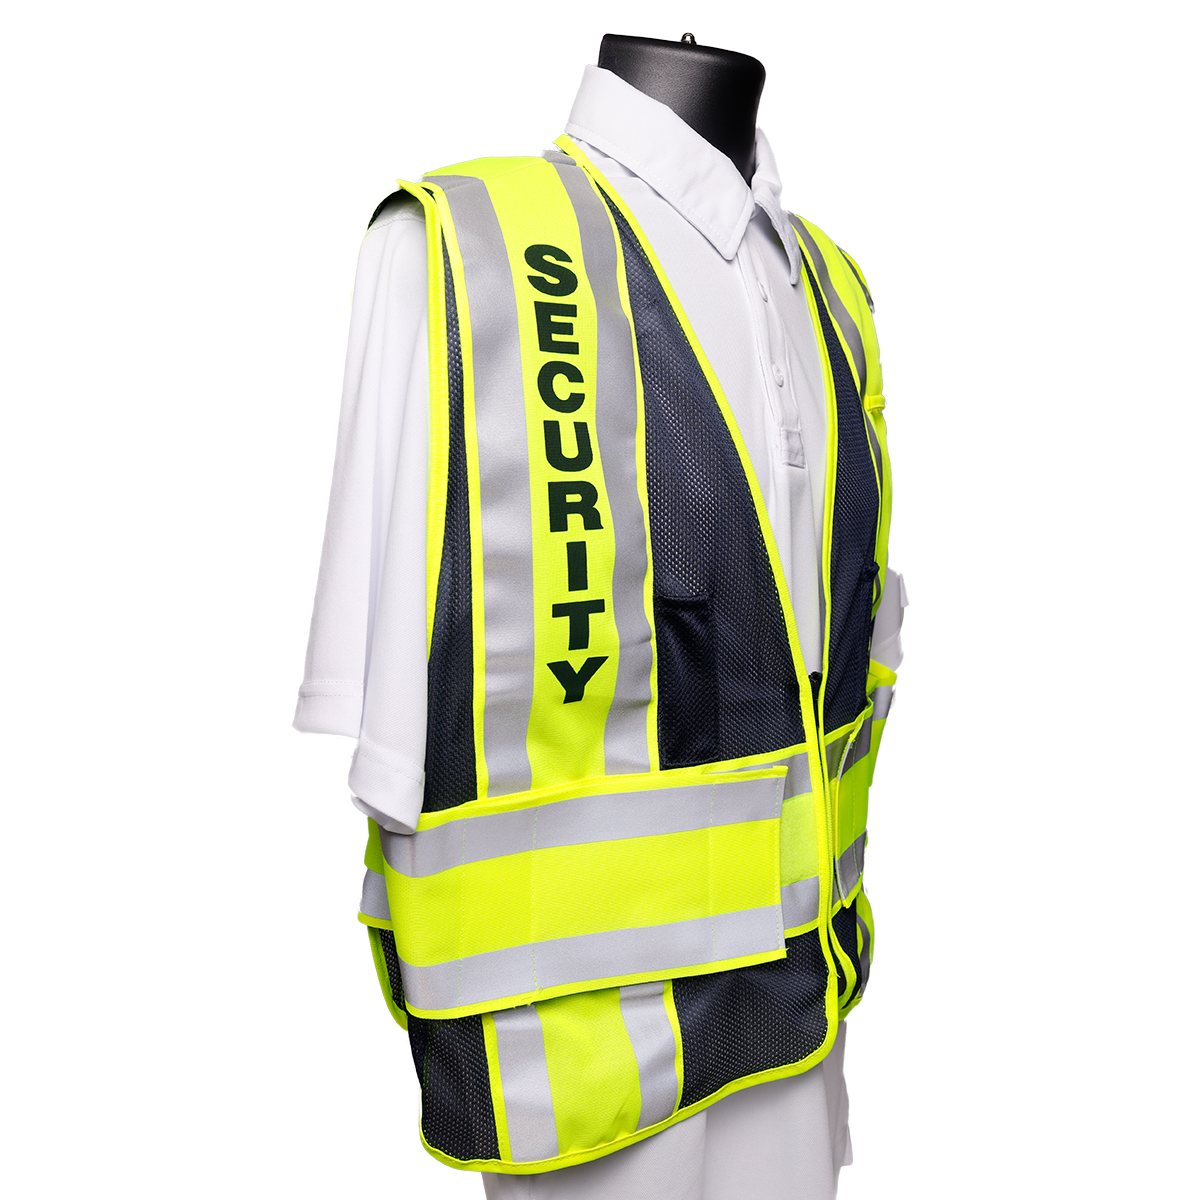 security Vest by ProUniforms